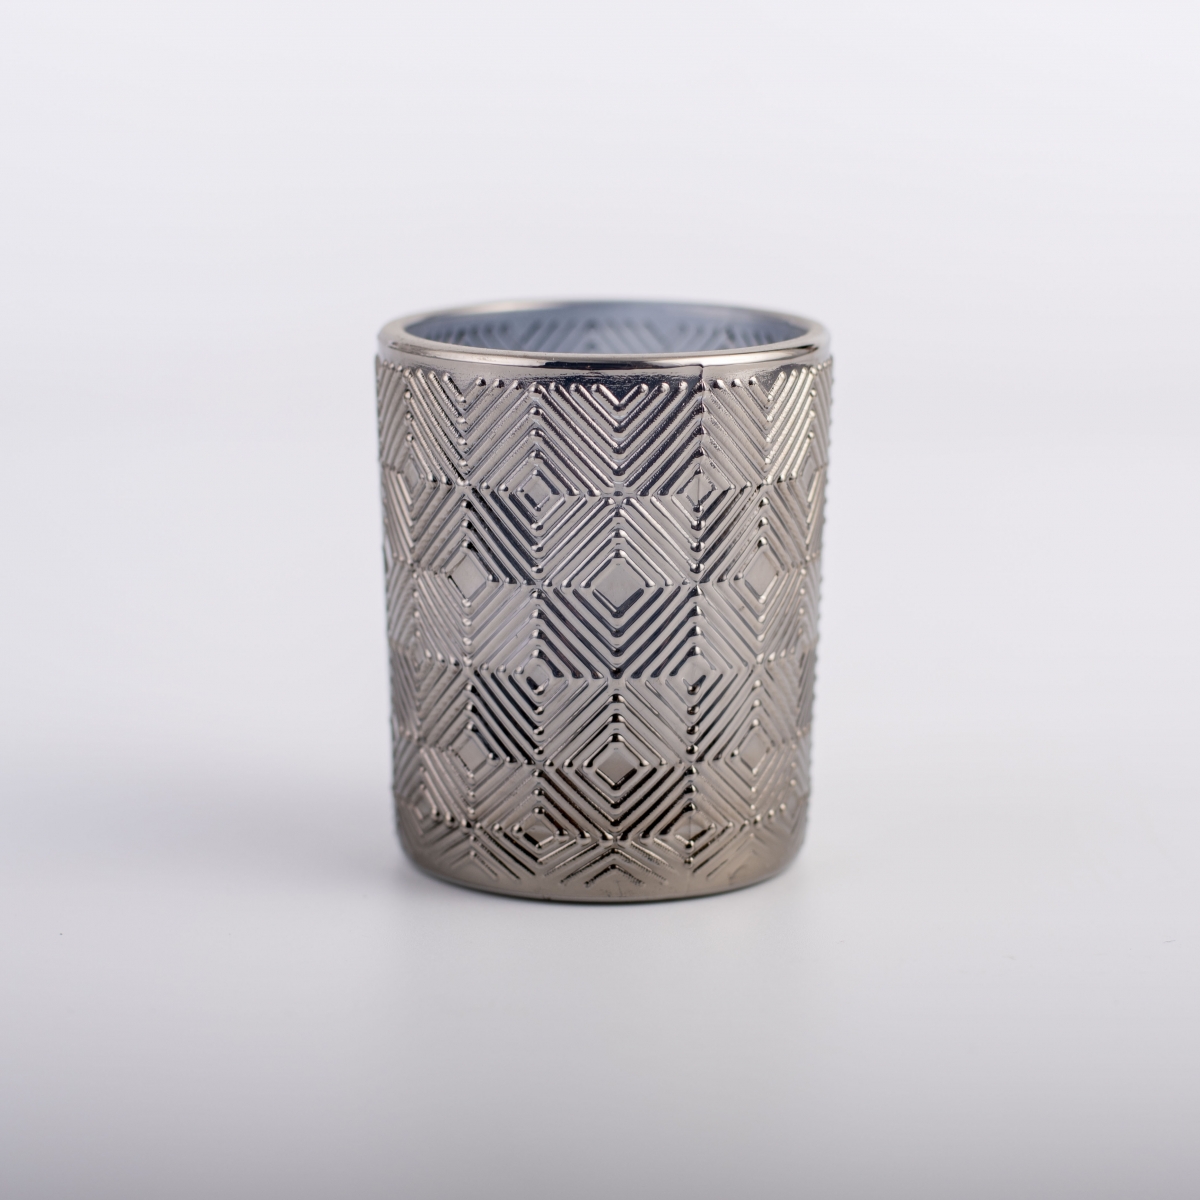 Candle Holder ：Smoke Gray Color , HERMES Square , Embossing Candle Jar , China Factory ,Cheap Price-HOWCANDLE-Candles,Scented Candles,Aromatherapy Candles,Soy Candles,Vegan Candles,Jar Candles,Pillar Candles,Candle Gift Sets,Essential Oils,Reed Diffuser,Candle Holder,